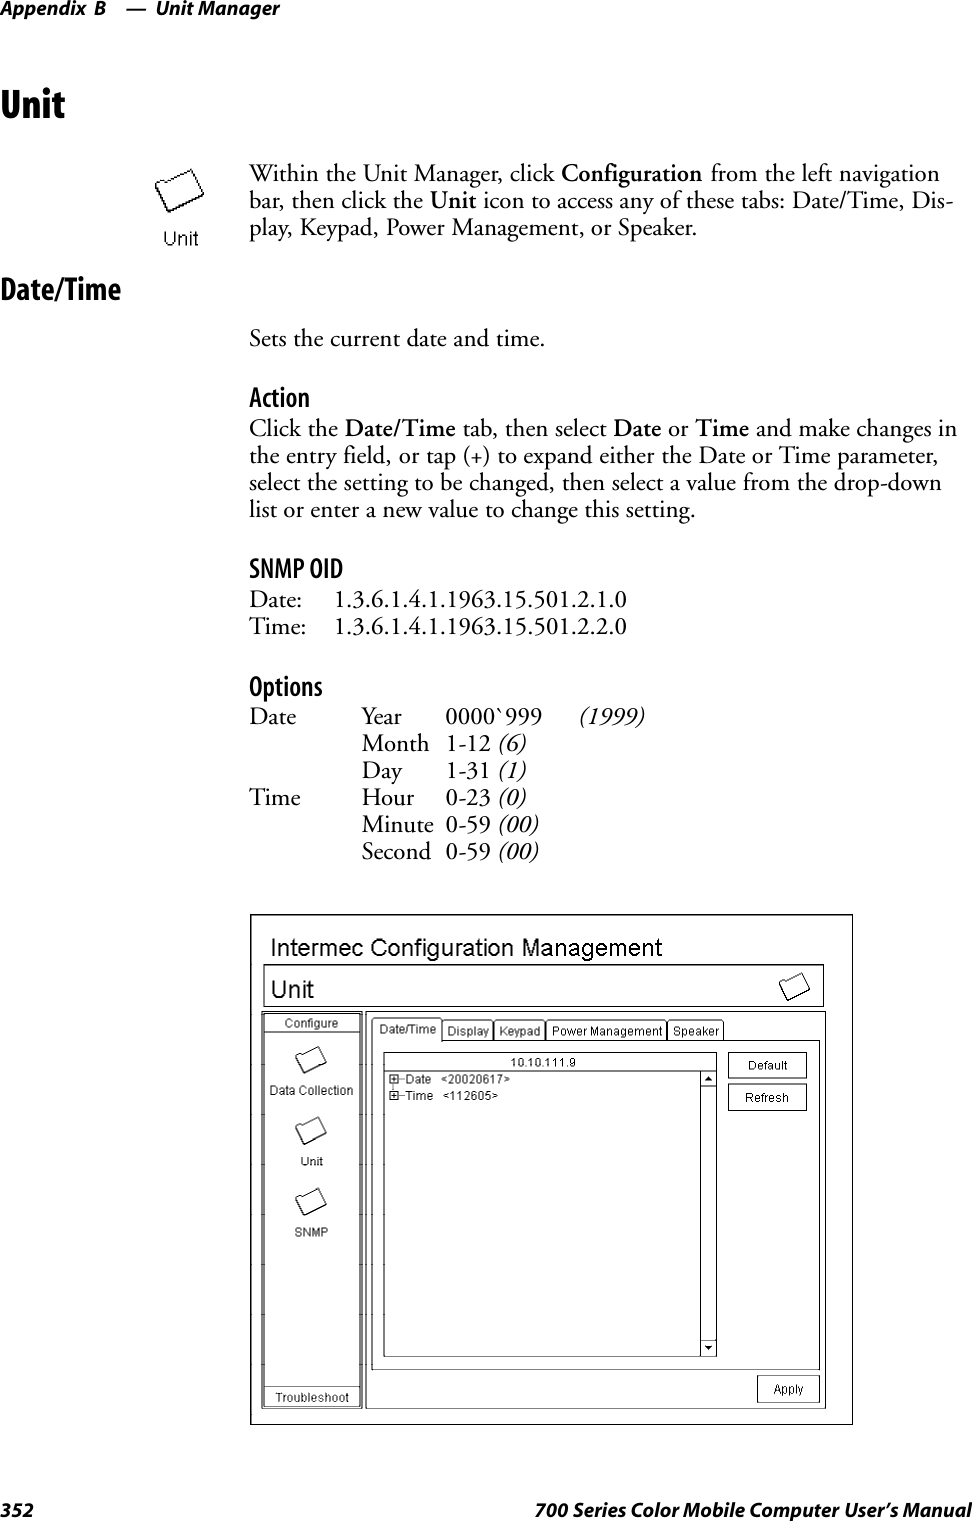 Unit ManagerAppendix —B352 700 Series Color Mobile Computer User’s ManualUnitWithin the Unit Manager, click Configuration from the left navigationbar, then click the Unit icon to access any of these tabs: Date/Time, Dis-play, Keypad, Power Management, or Speaker.Date/TimeSets the current date and time.ActionClick the Date/Time tab, then select Date or Time and make changes inthe entry field, or tap (+) to expand either the Date or Time parameter,select the setting to be changed, then select a value from the drop-downlist or enter a new value to change this setting.SNMP OIDDate: 1.3.6.1.4.1.1963.15.501.2.1.0Time: 1.3.6.1.4.1.1963.15.501.2.2.0OptionsDate Year 0000`999 (1999)Month 1-12 (6)Day 1-31 (1)Time Hour 0-23 (0)Minute 0-59 (00)Second 0-59 (00)